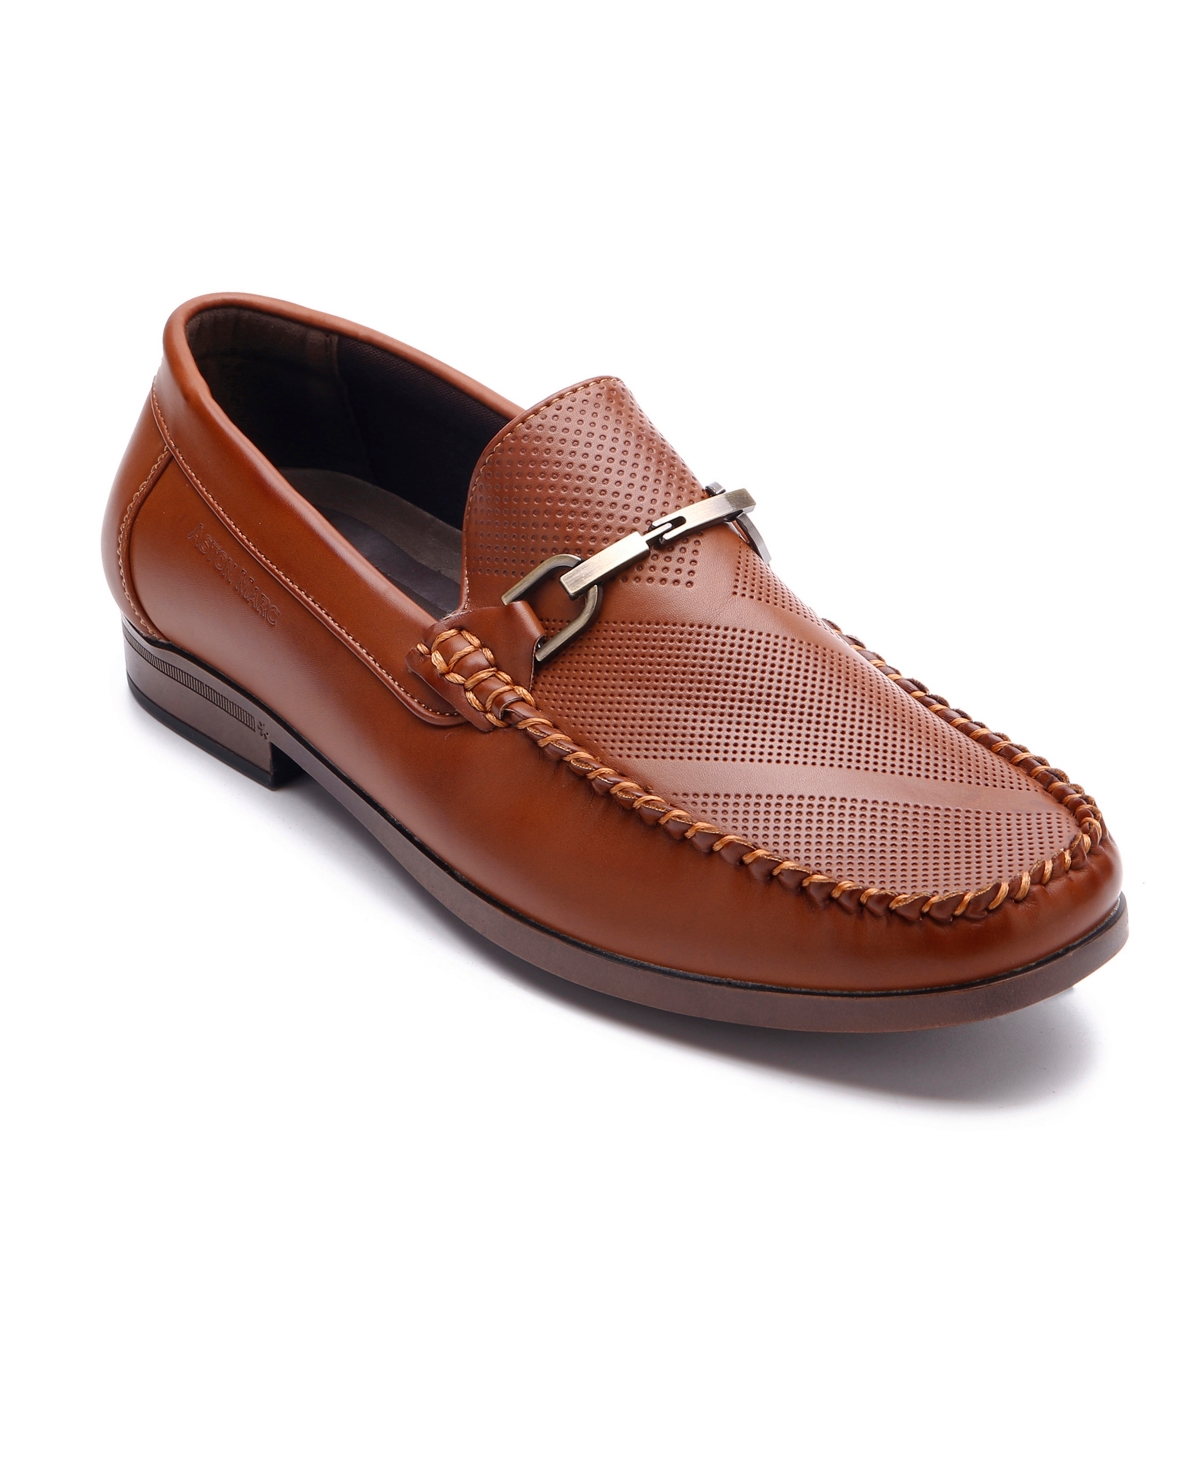 Men's Perforated Buckle Loafers - Tan